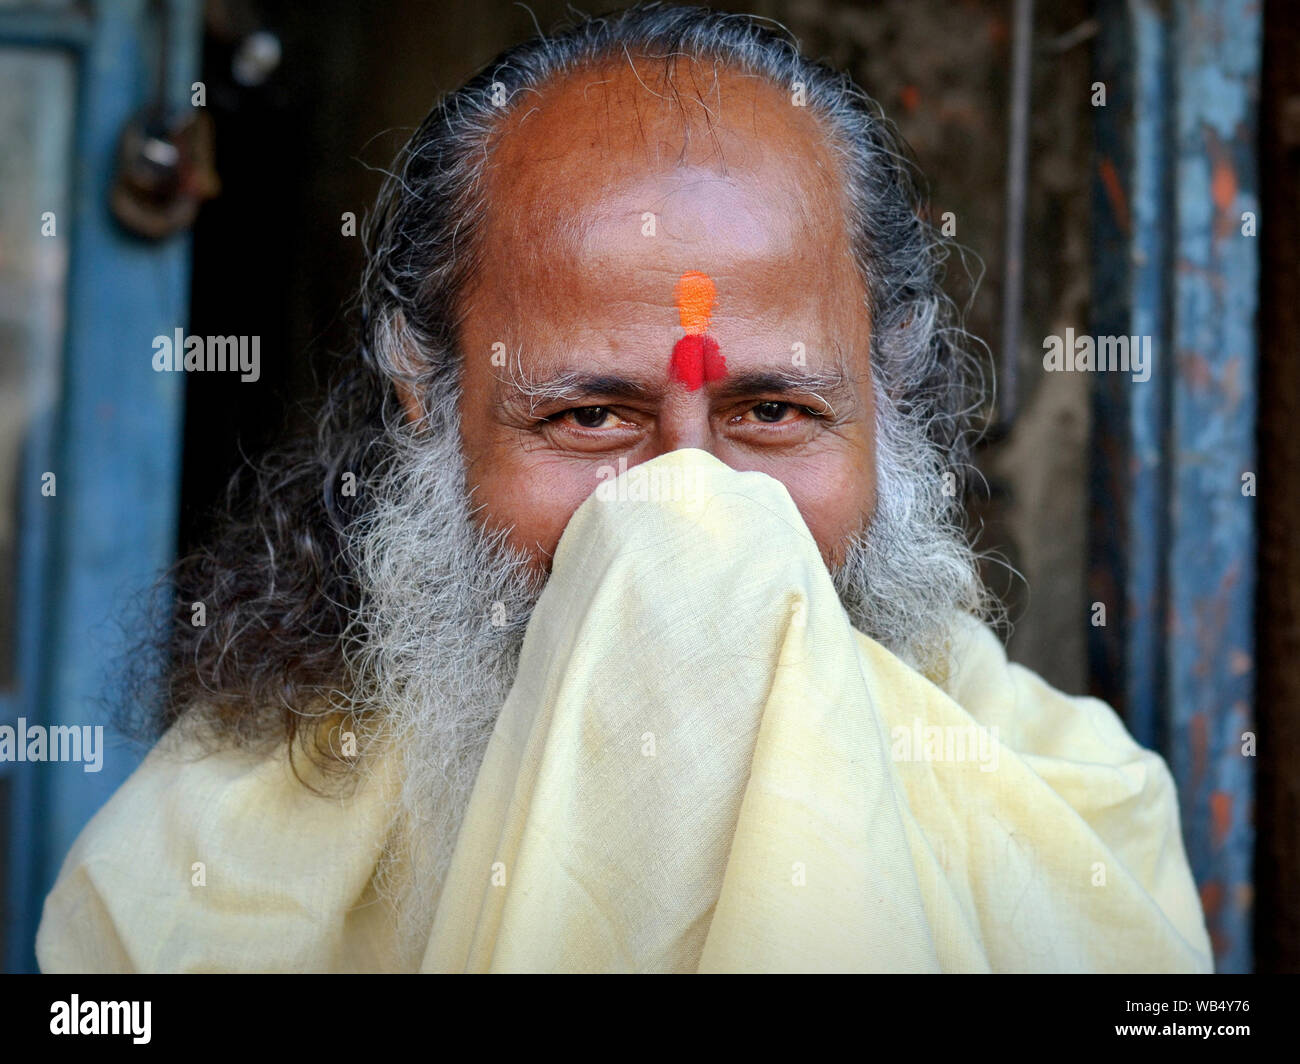 Smiling elderly Hindu priest (pujari) covers the lower part of his face with his robe and blow his nose with the priest's robe. Stock Photo